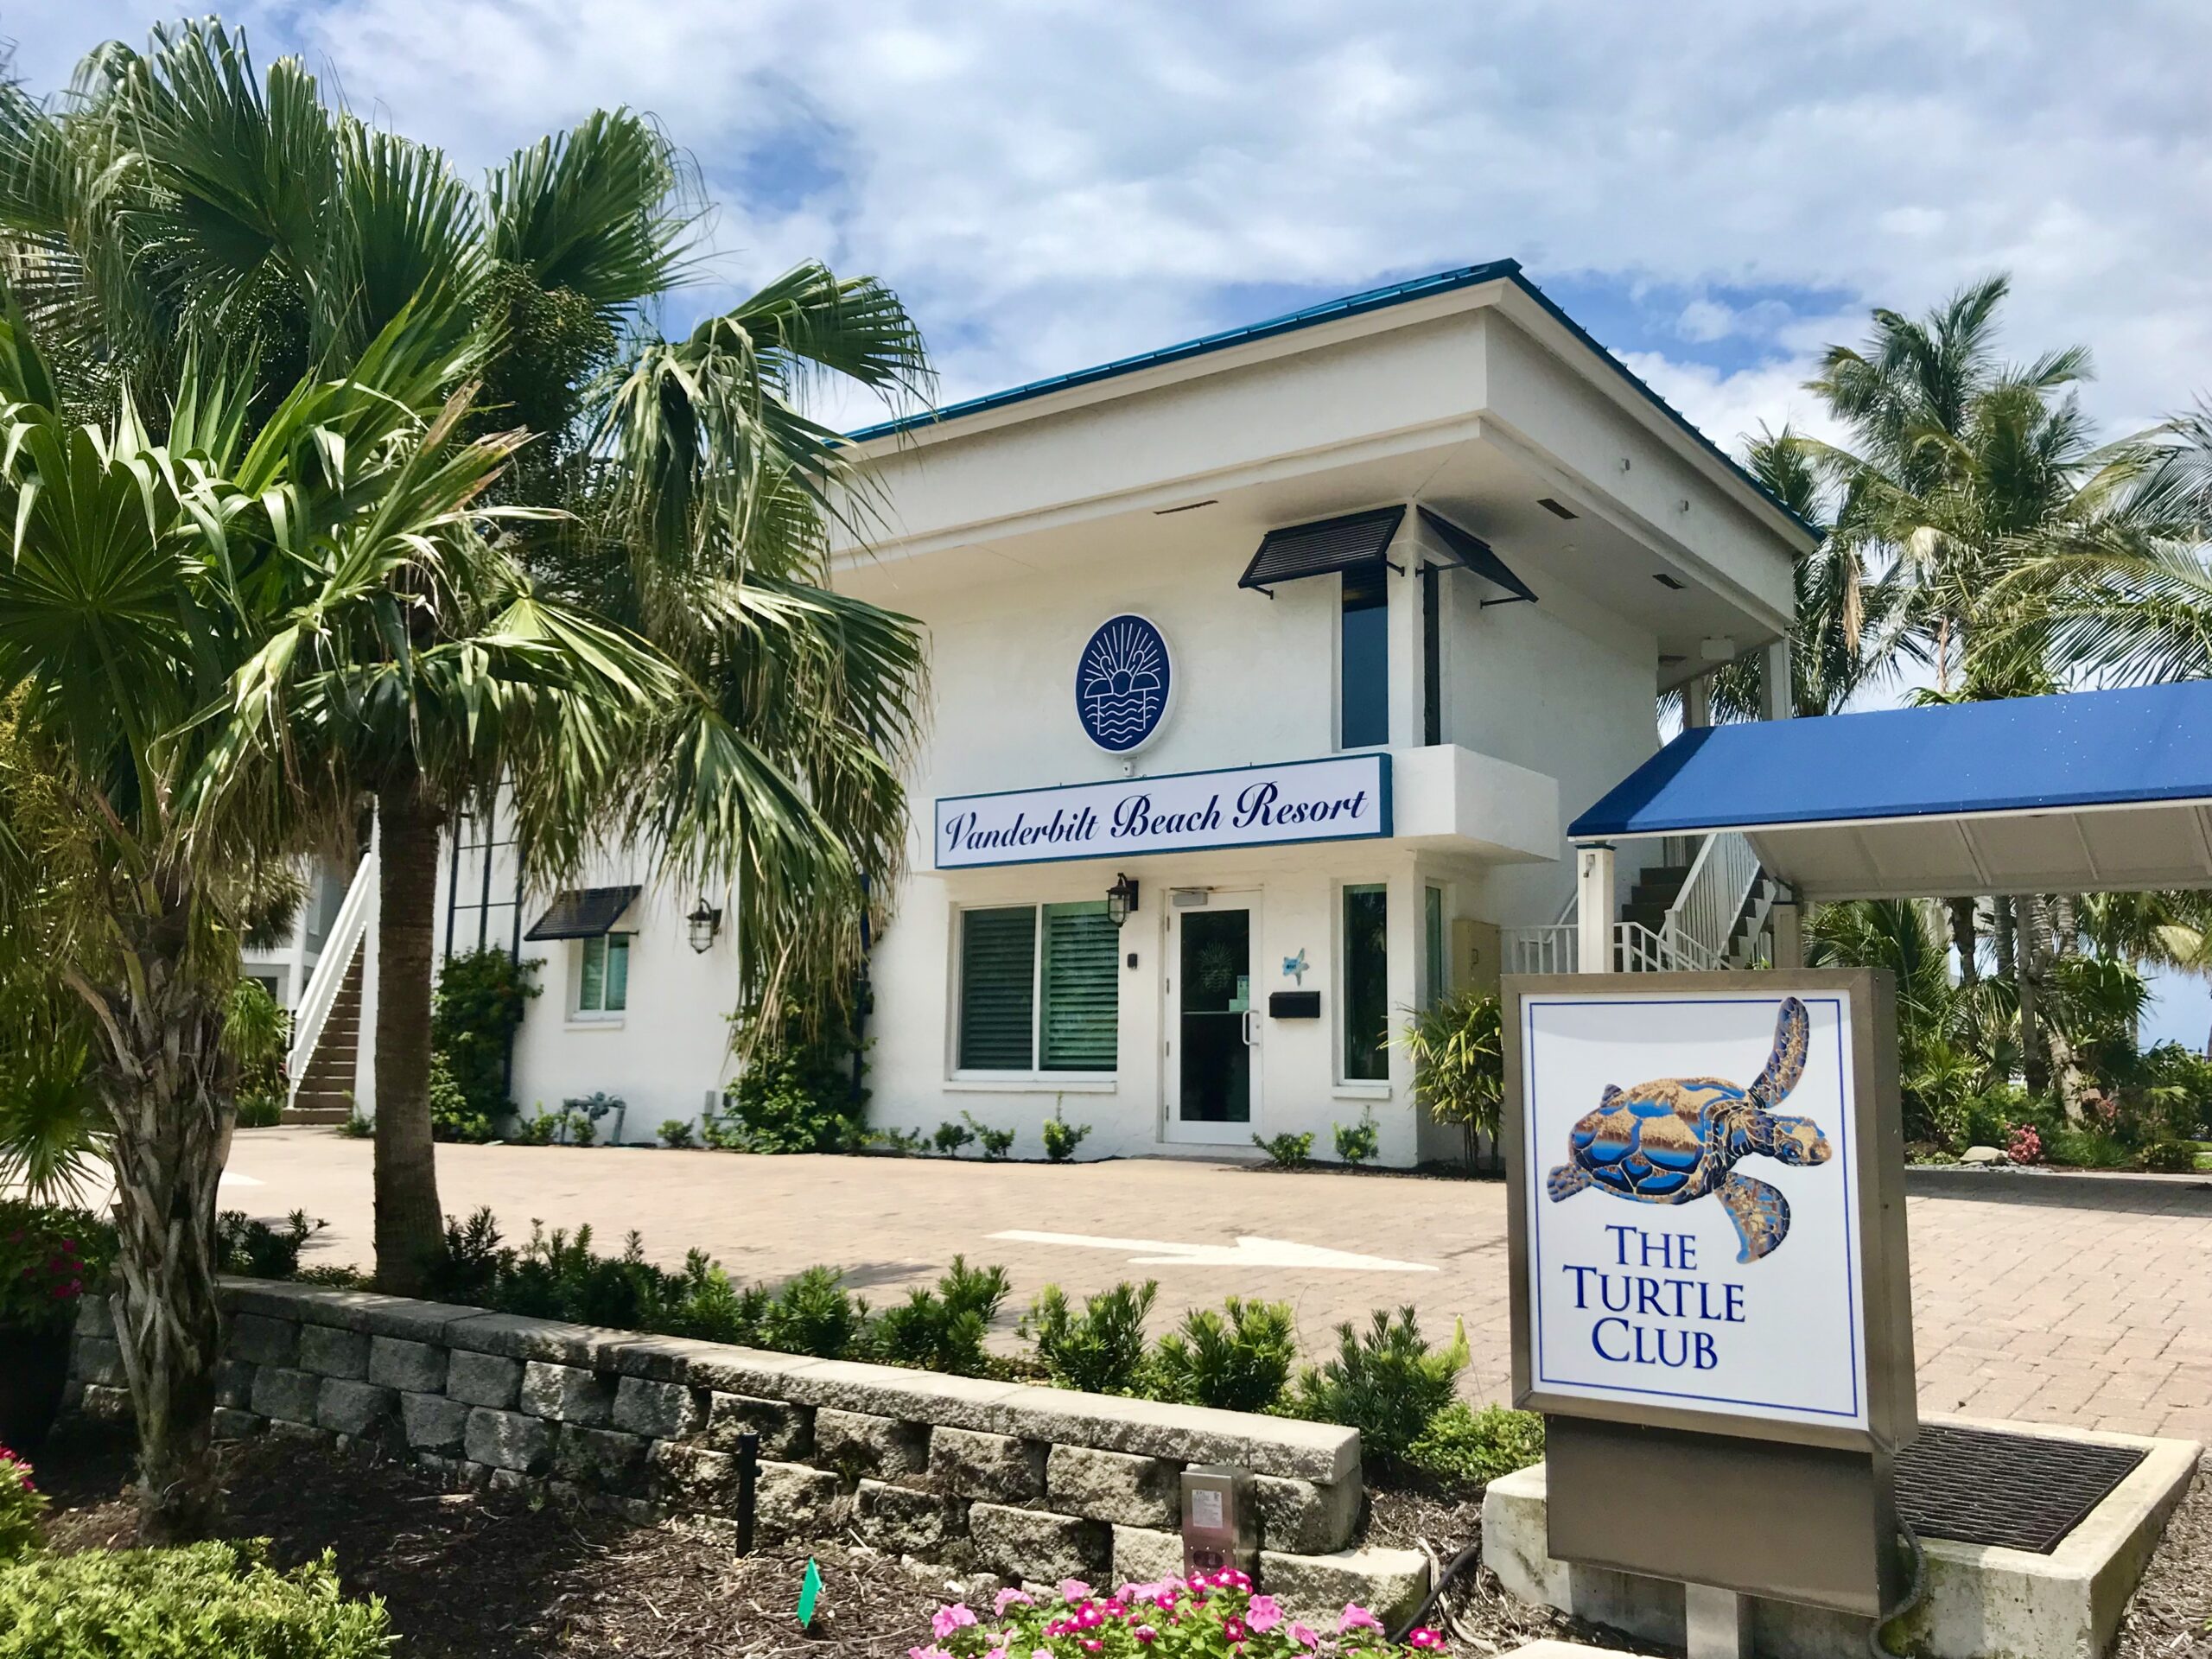 The Turtle Club's reopening has been delayed until March.